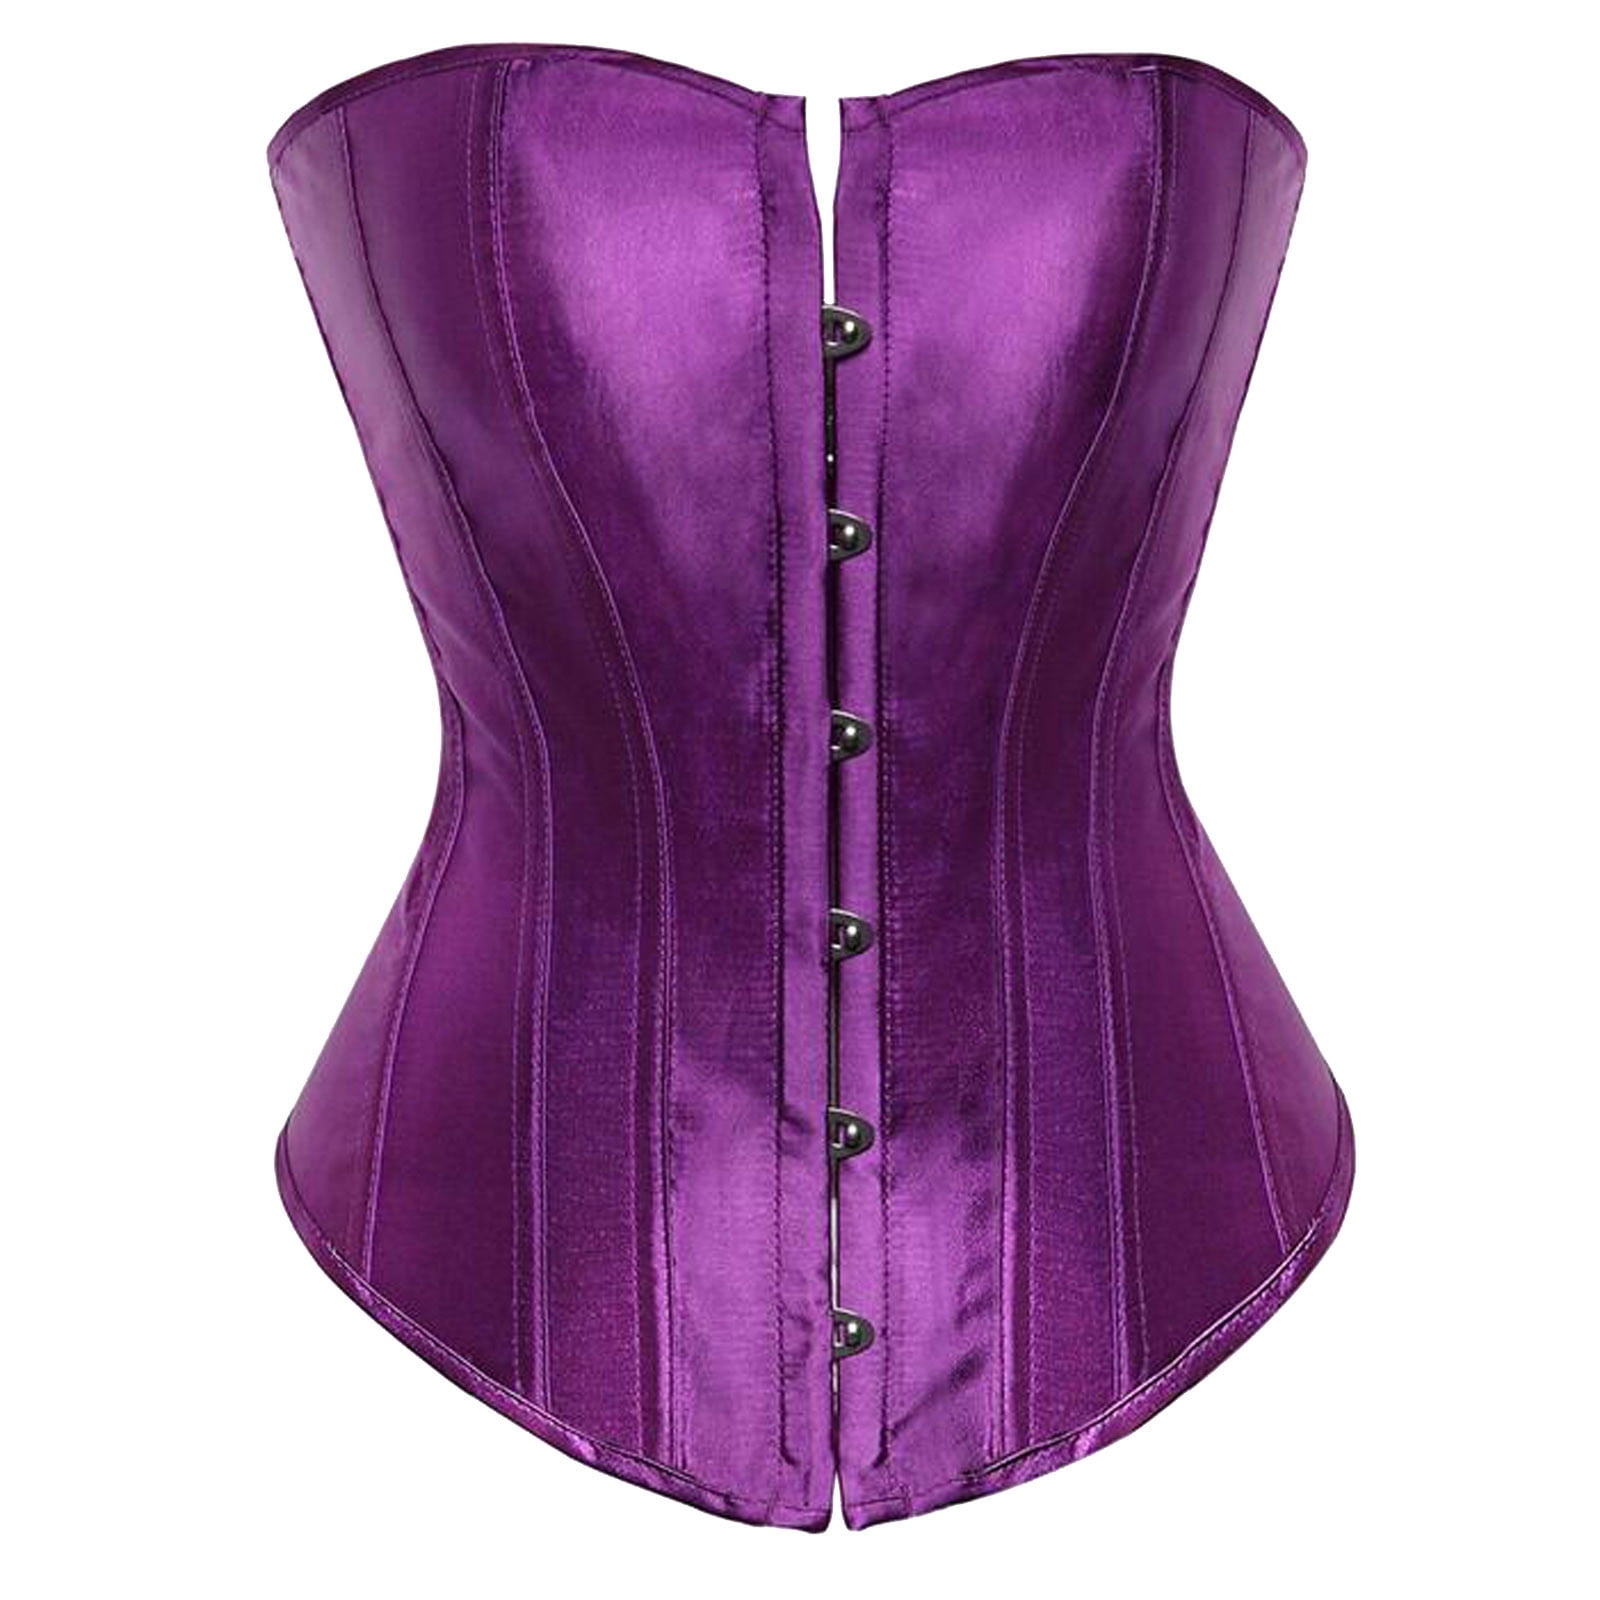 up to 56 38,40 full-breast Corset Corset Extra Long from Leather Size 34,36